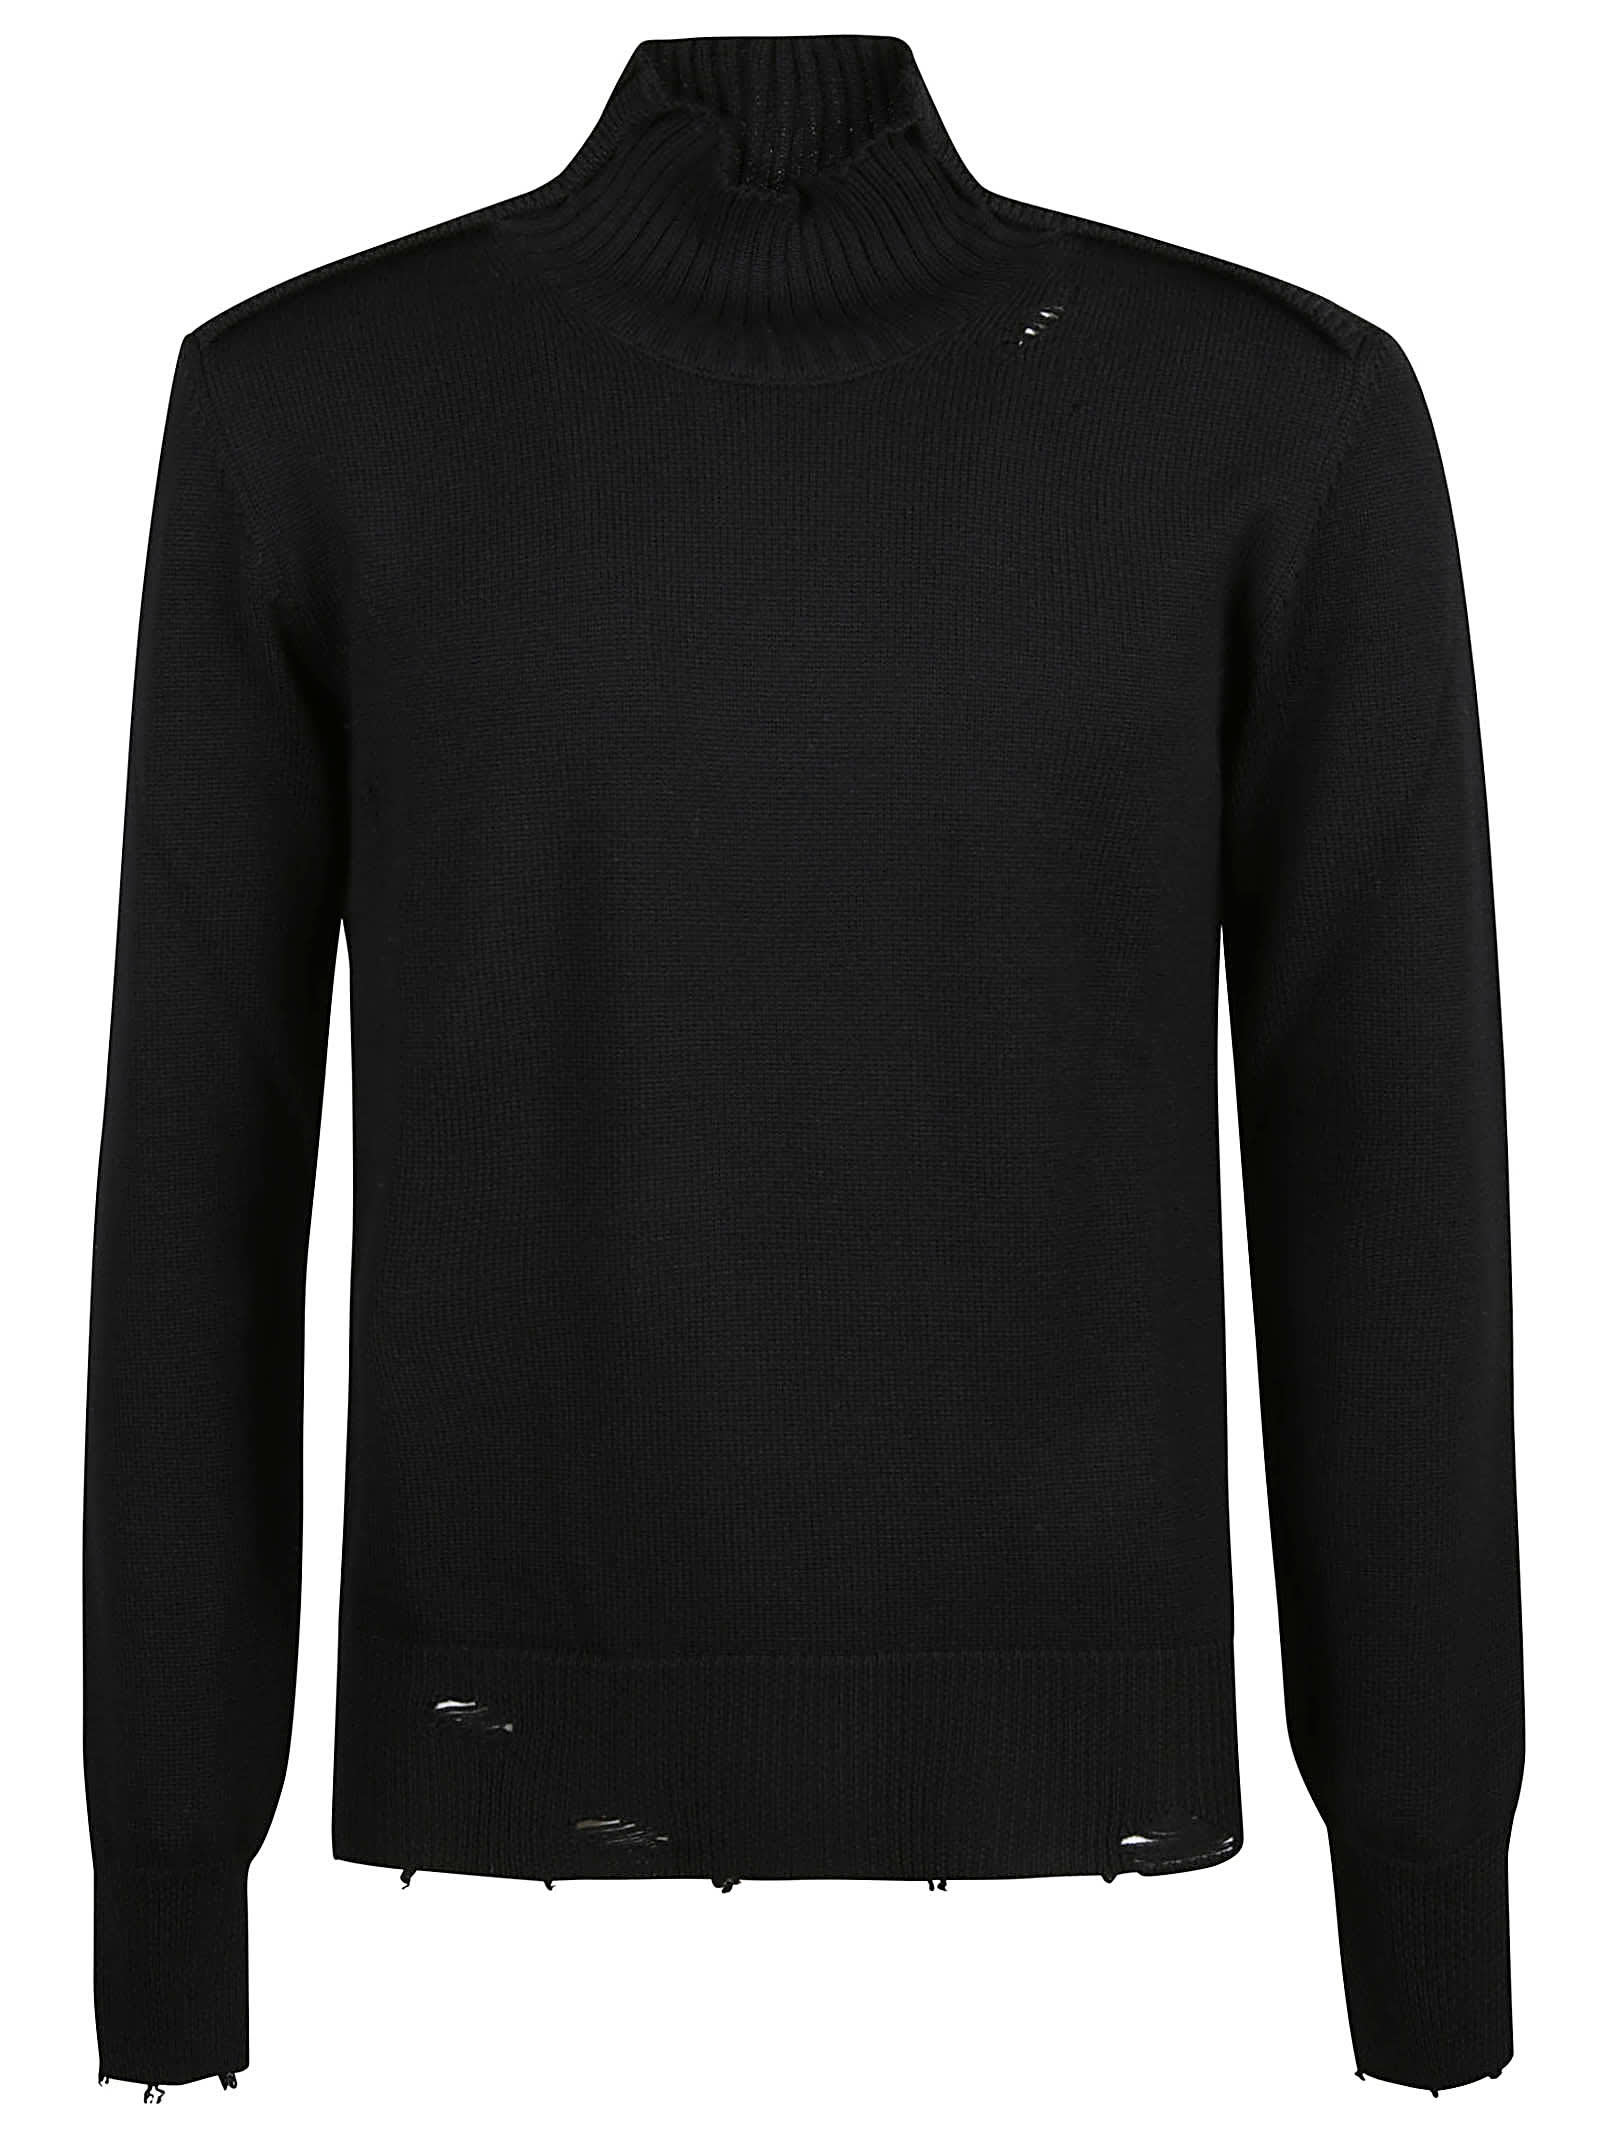 Paolo Pecora Destroyed Effect Turtleneck Knit Sweater